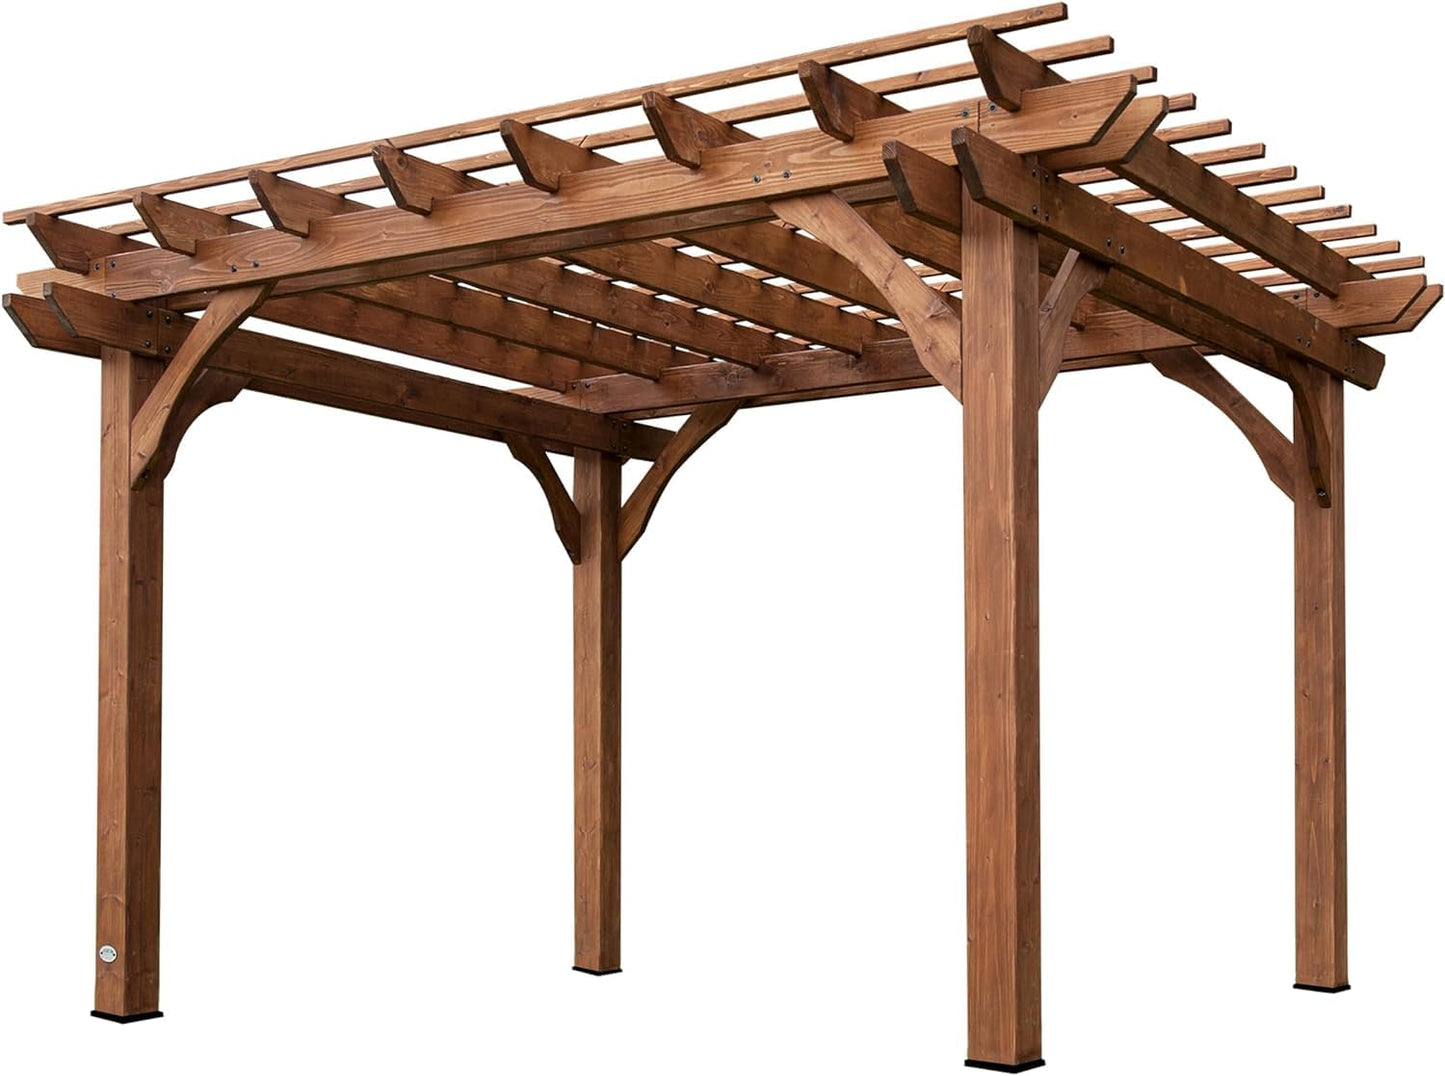 Backyard Discovery 12' by 10' Cedar Wood Pergola, Wind Secure, Strong, Quality Made, Rot Resistant, Concrete Anchors, Spacious for Outdoor Patio,